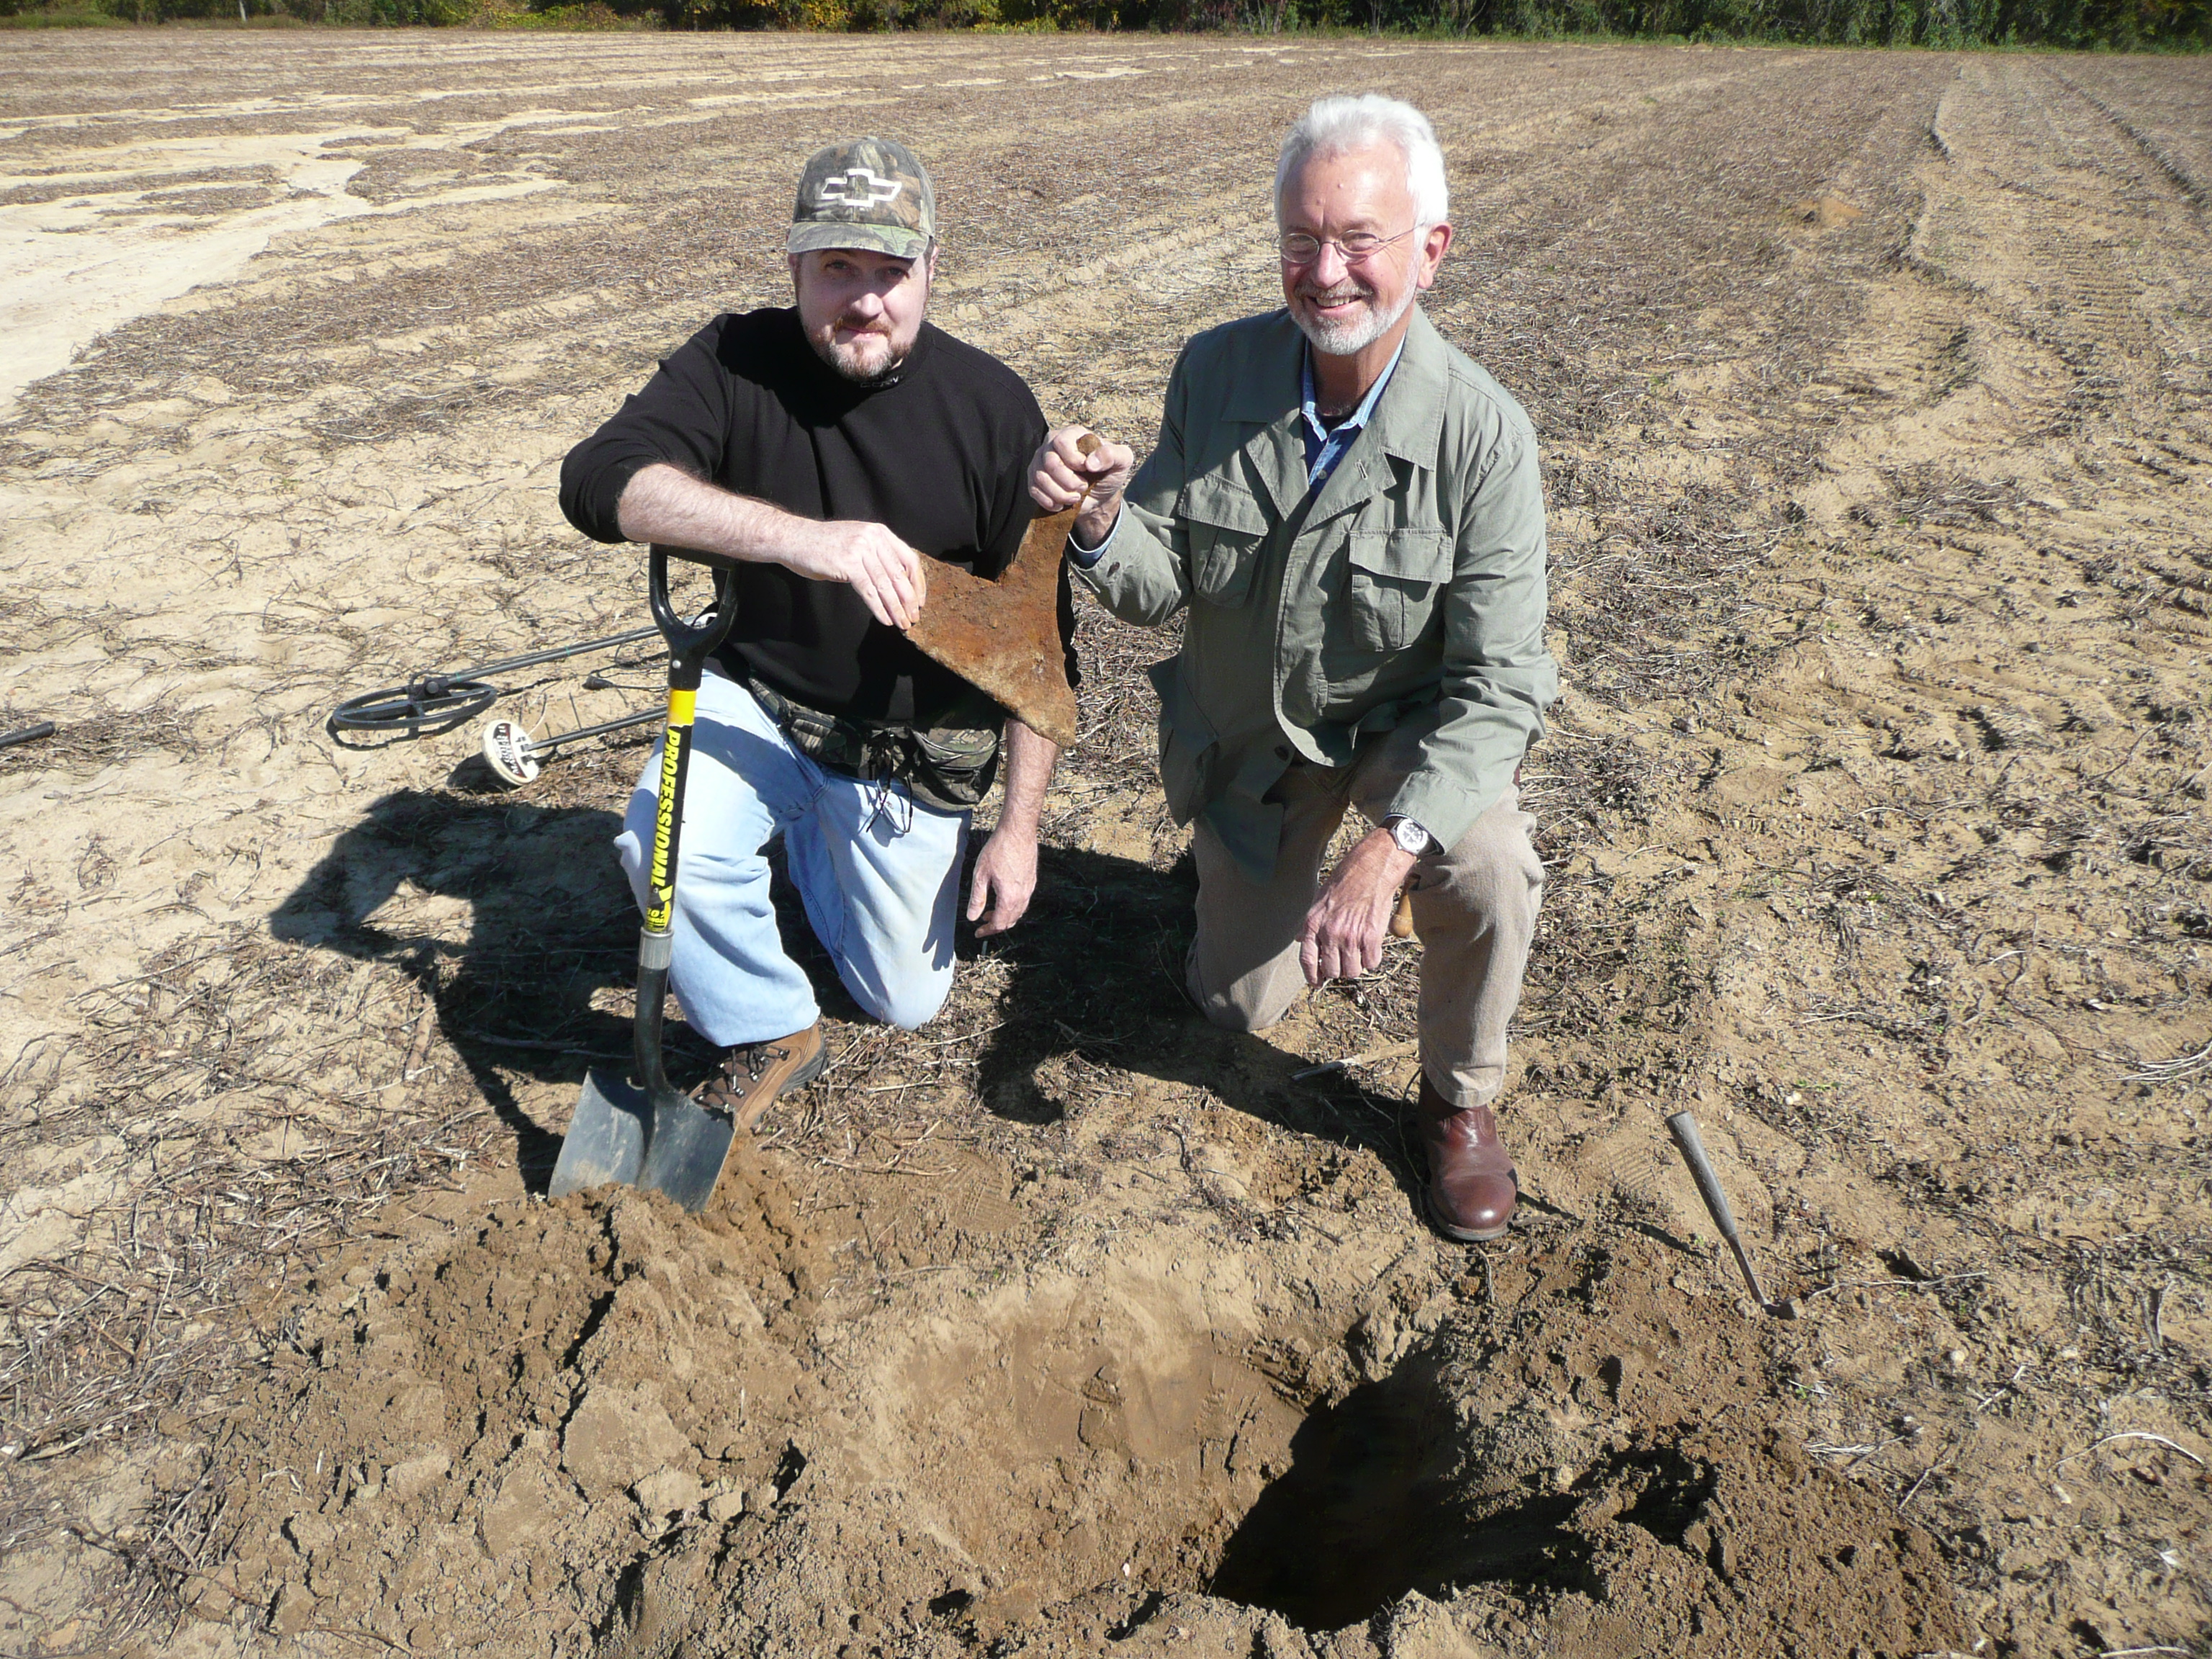 Sean and Barry in the field with a newly-recovered, flight oriented plow point